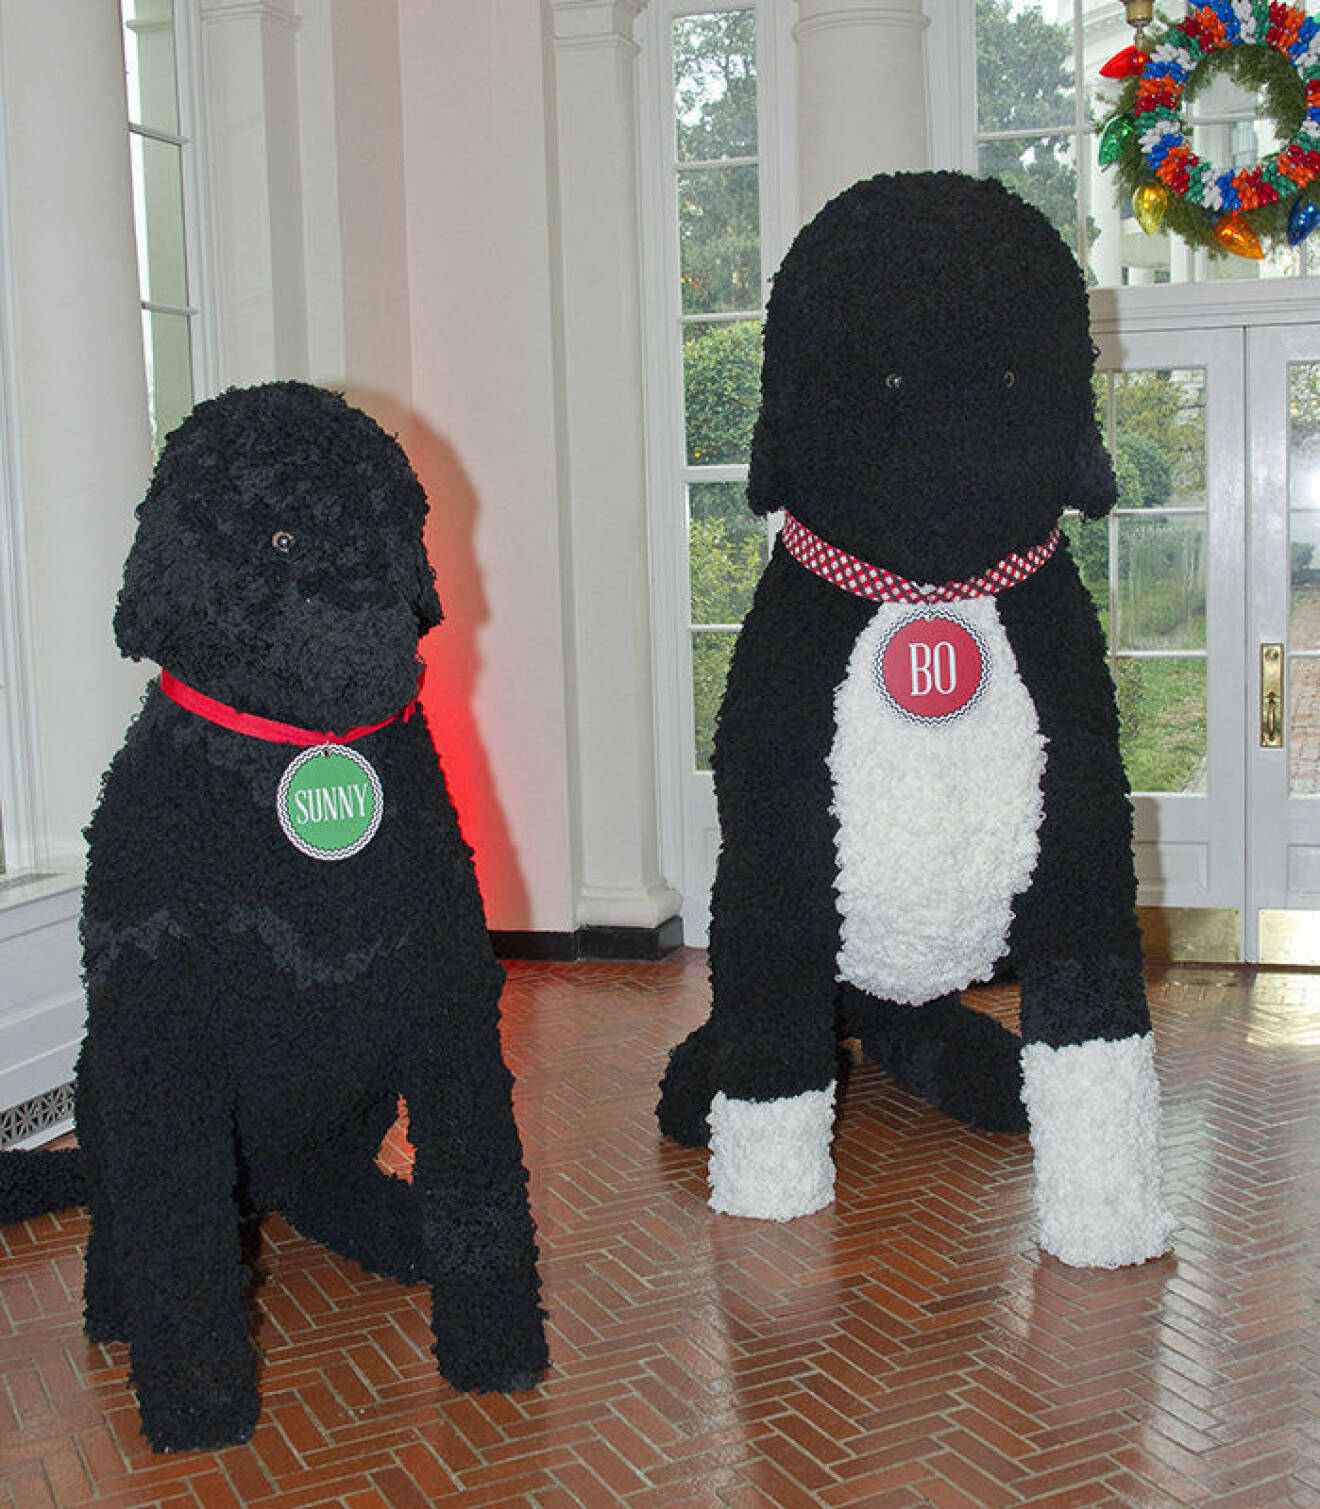 The 2016 White House Christmas decorations are previewed for the press at the White House in Washington, DC on Tuesday, November 29, 2016. Pictured are larger than life replicas of the Obama dogs Sunny and Bo, made of 25,000 yarn pom-poms. The first lady's office released the following statement to describe those decorations, "This year?s holiday theme, 'The Gift of the Holidays,' reflects on not only the joy of giving and receiving, but also the true gifts of life, such as service, friends and family, education, and good health, as we celebrate the holiday season." Credit: Ron Sachs / CNP /insight media